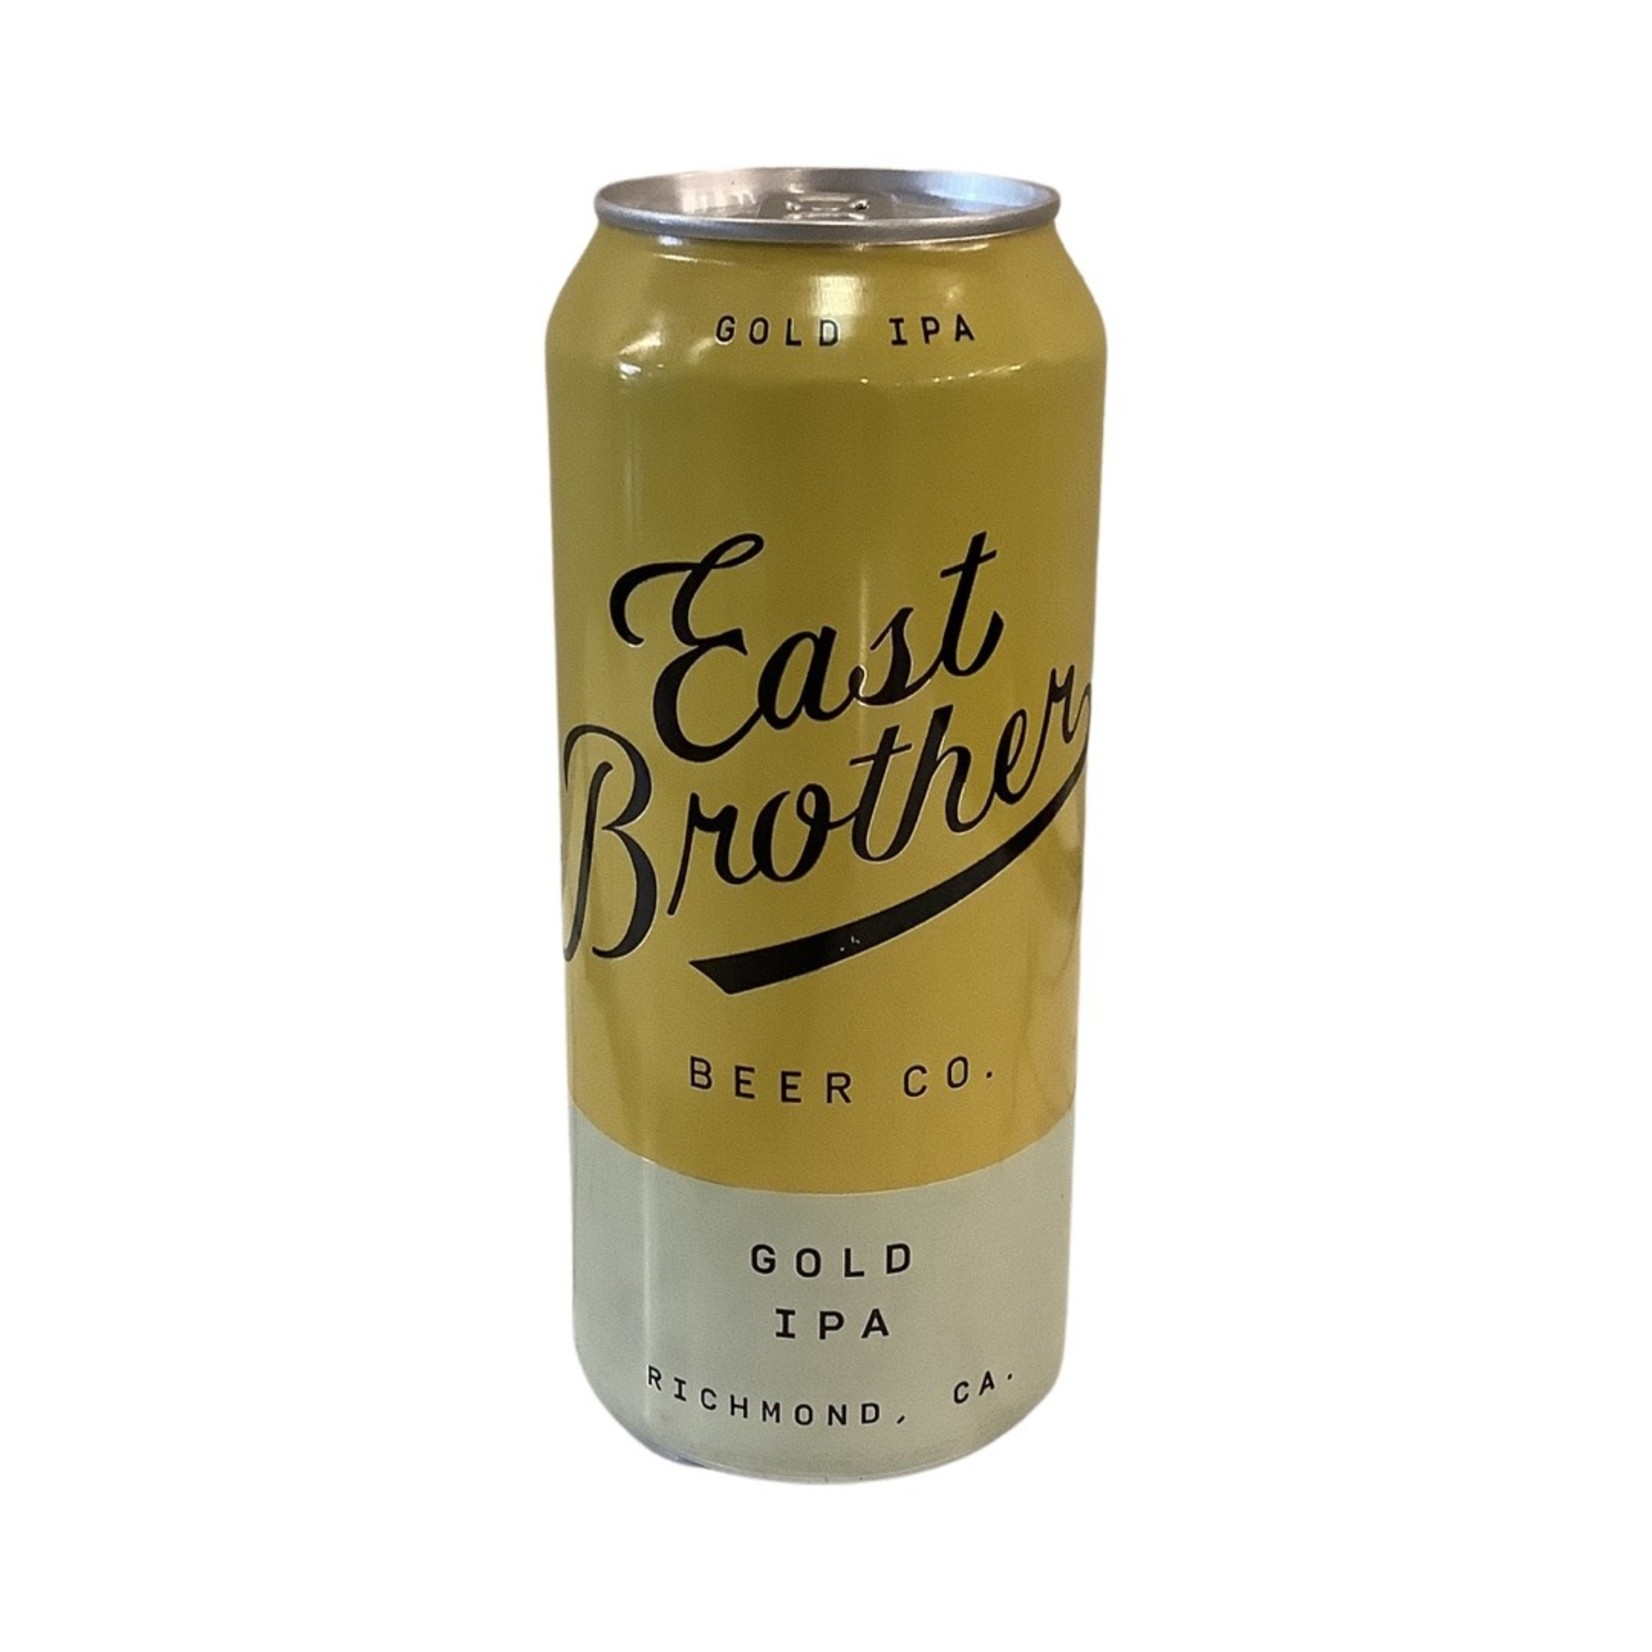 East Brother Gold IPA 16 OZ, Richmond CA